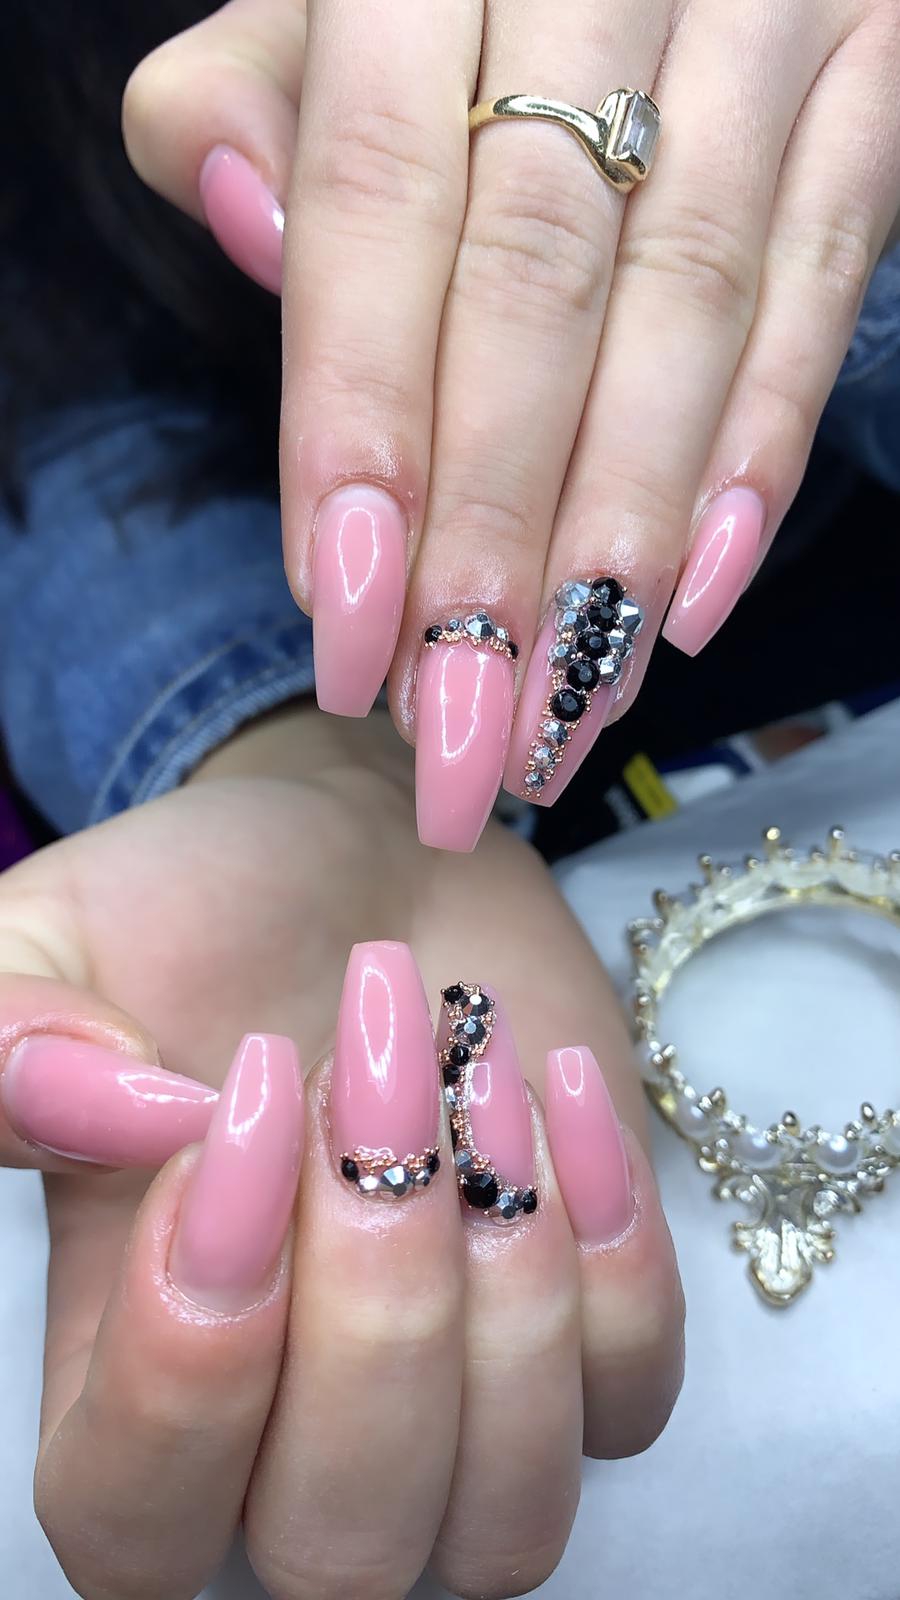 Nail Extensions - Gel / Acryl / Acrygel - Nails By Moniss